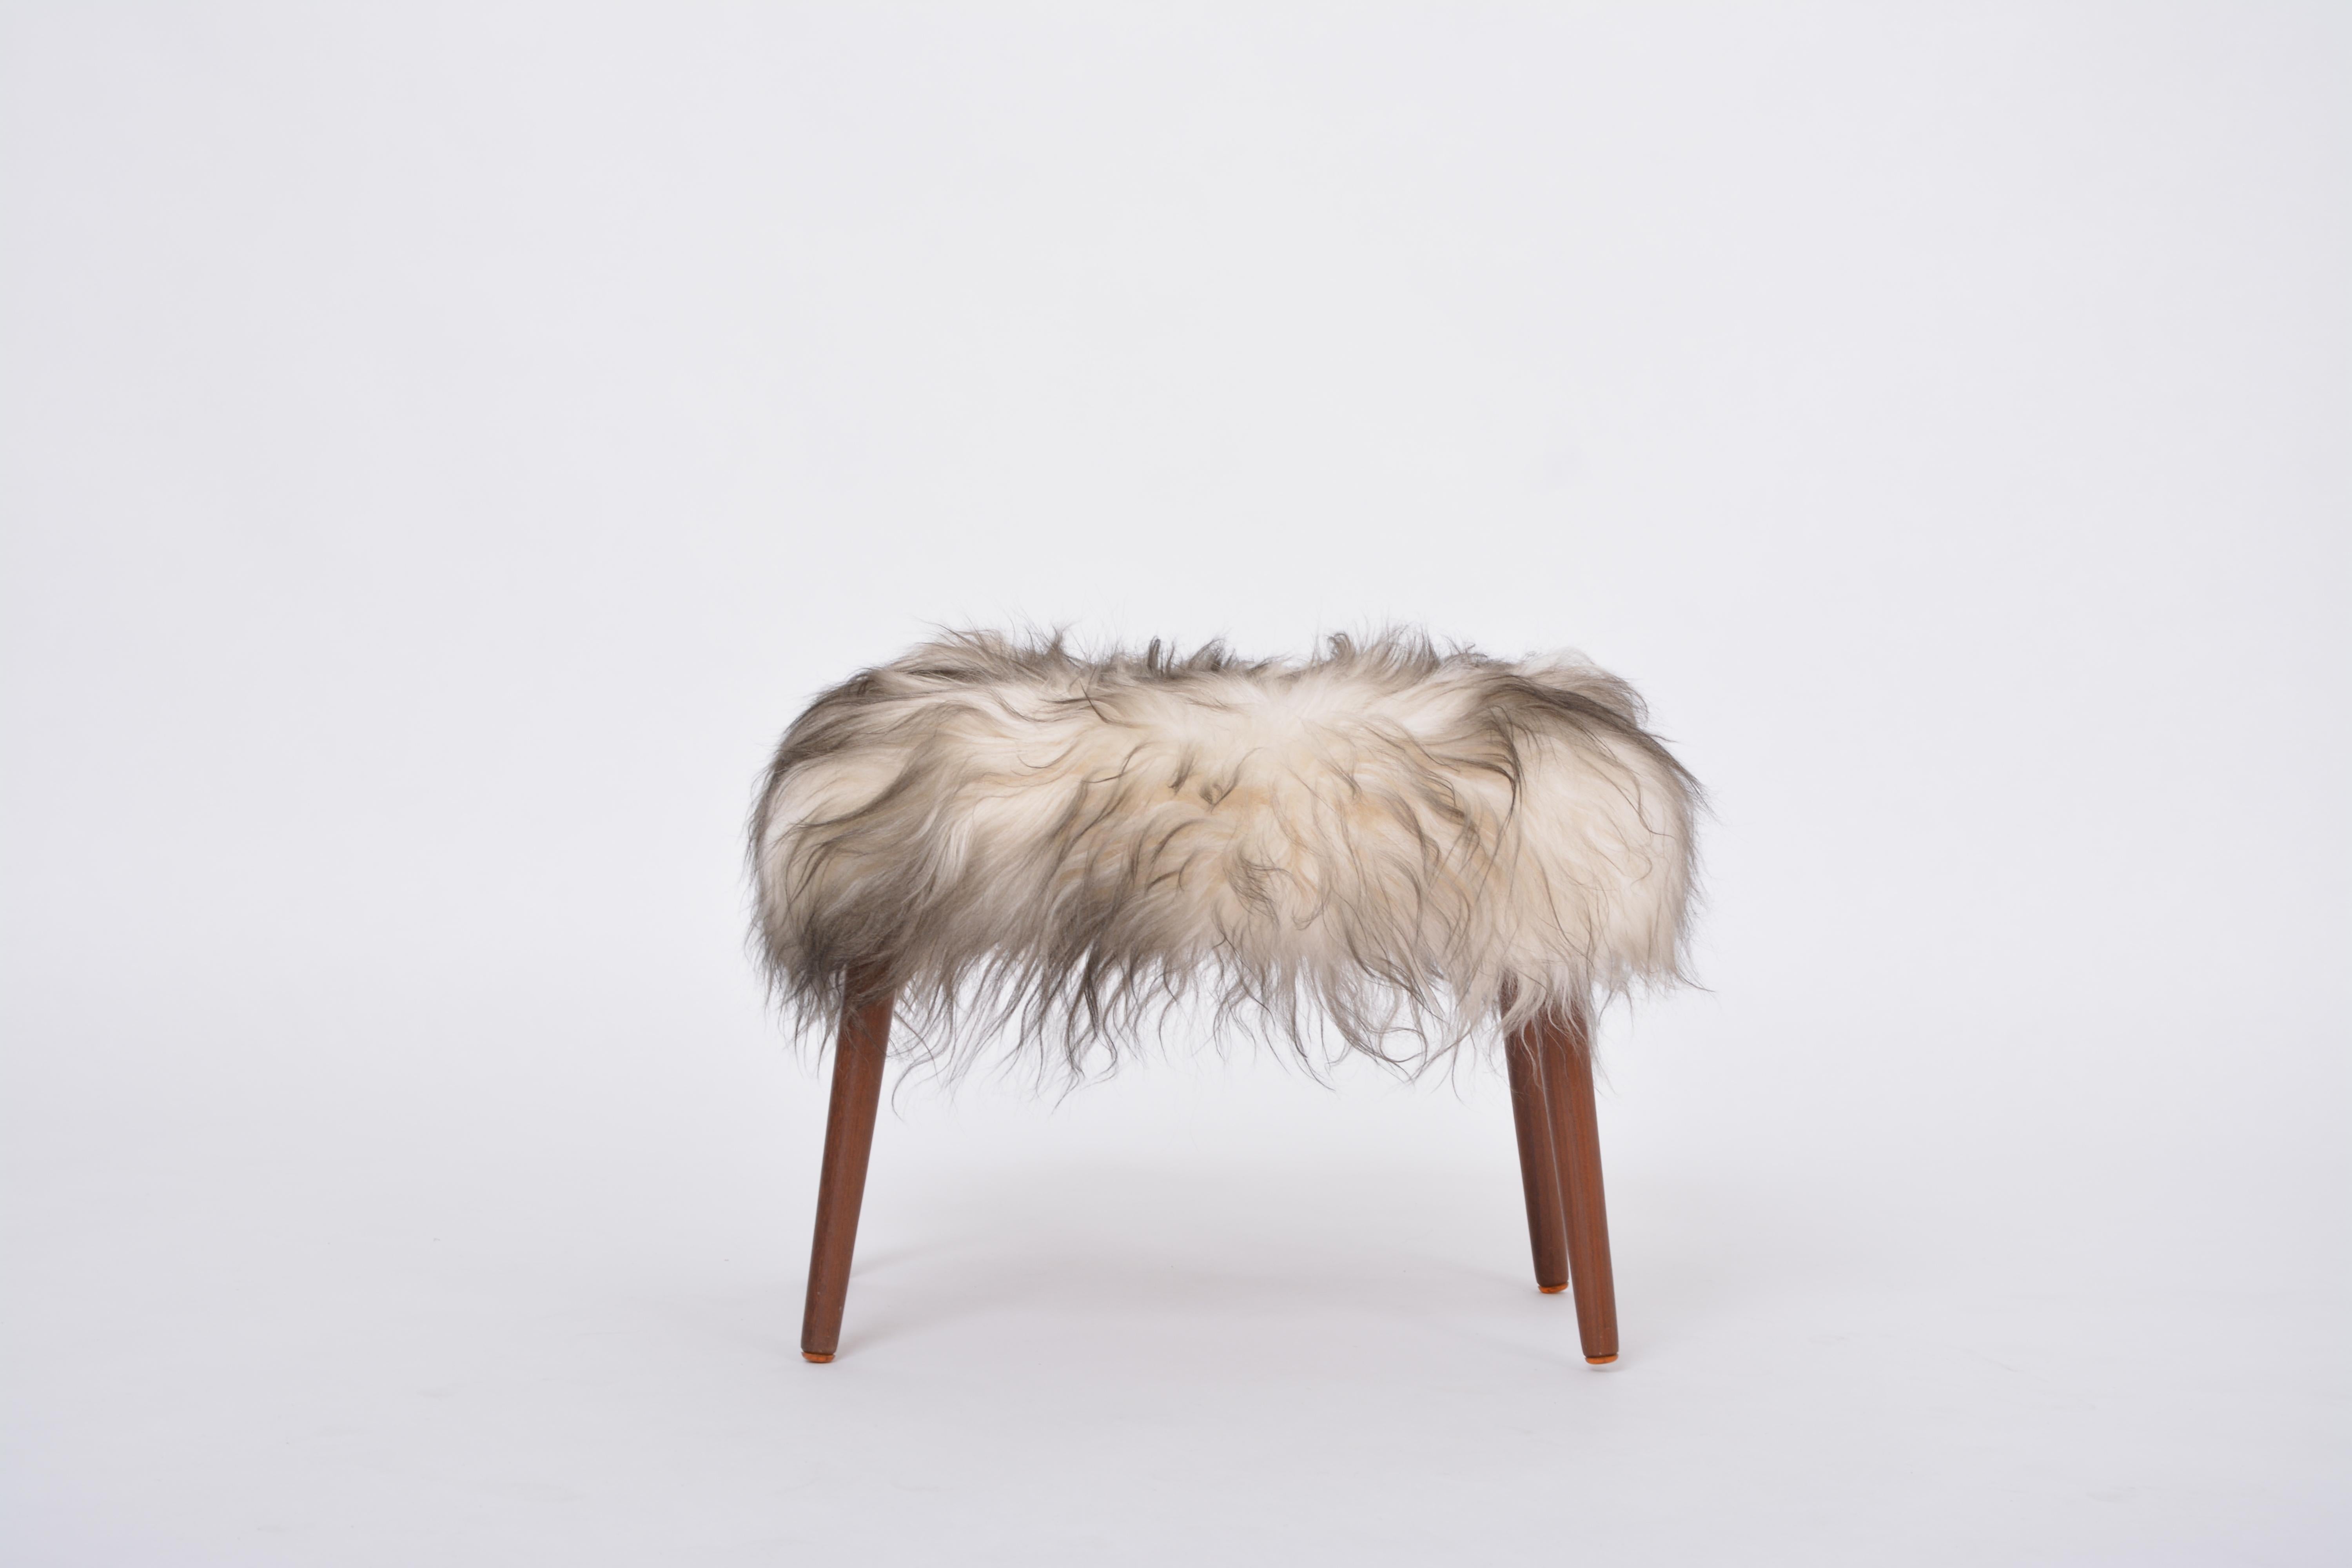 Danish Mid-century Modern stool reupholstered in white and black sheep skin For Sale 1